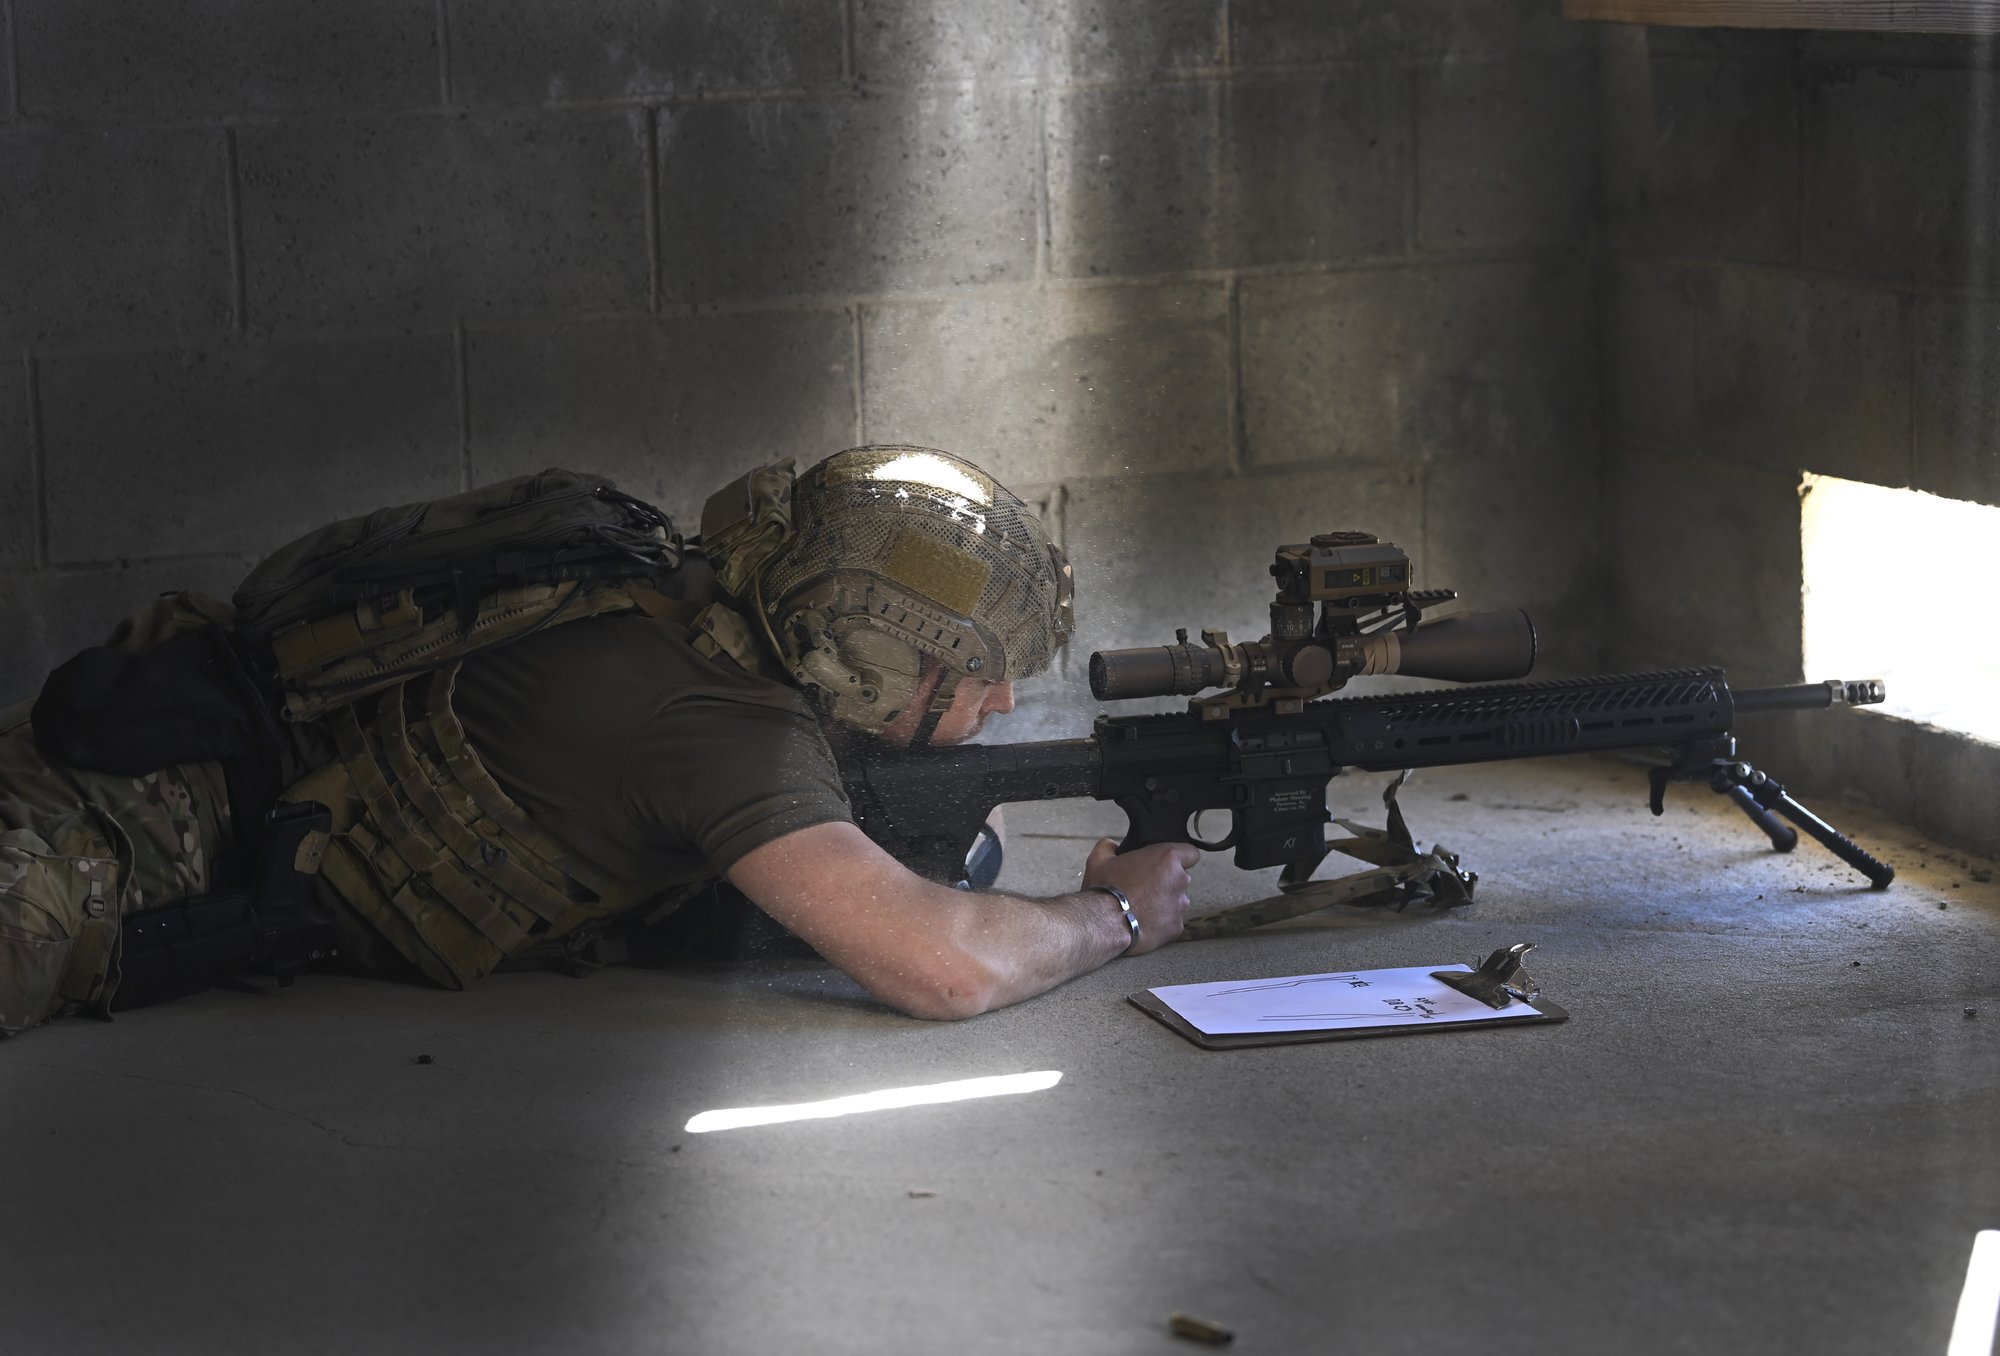 A competitor in the United States Army Special Operations Command (USASOC) International Sniper Competition looks through a riflescope while searching for long-distance targets at Fort Bragg, North Carolina, March 21, 2022. US Army photo by K. Kassens.